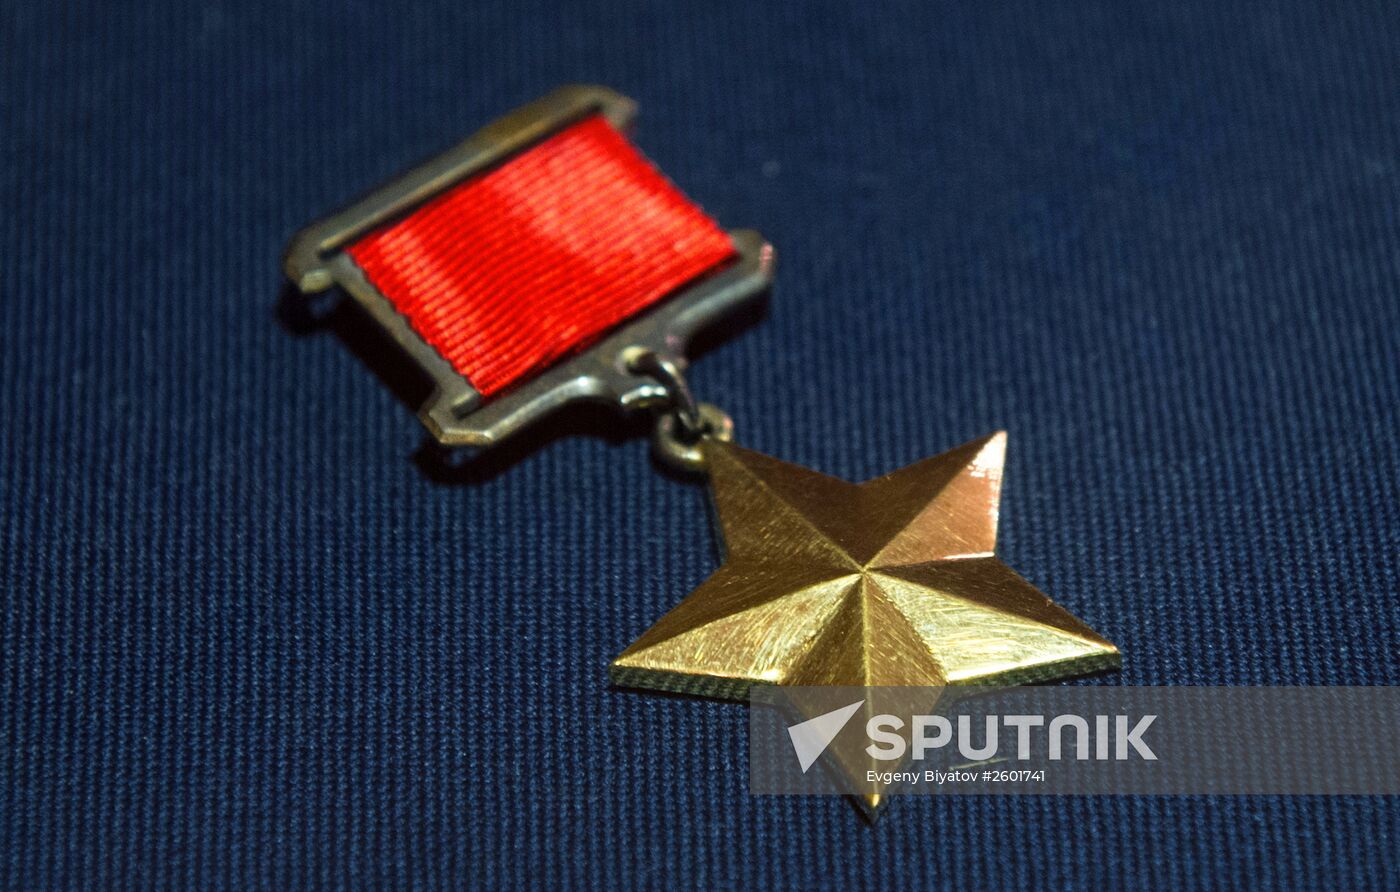 "Memory of the Victory. World War II Awards"